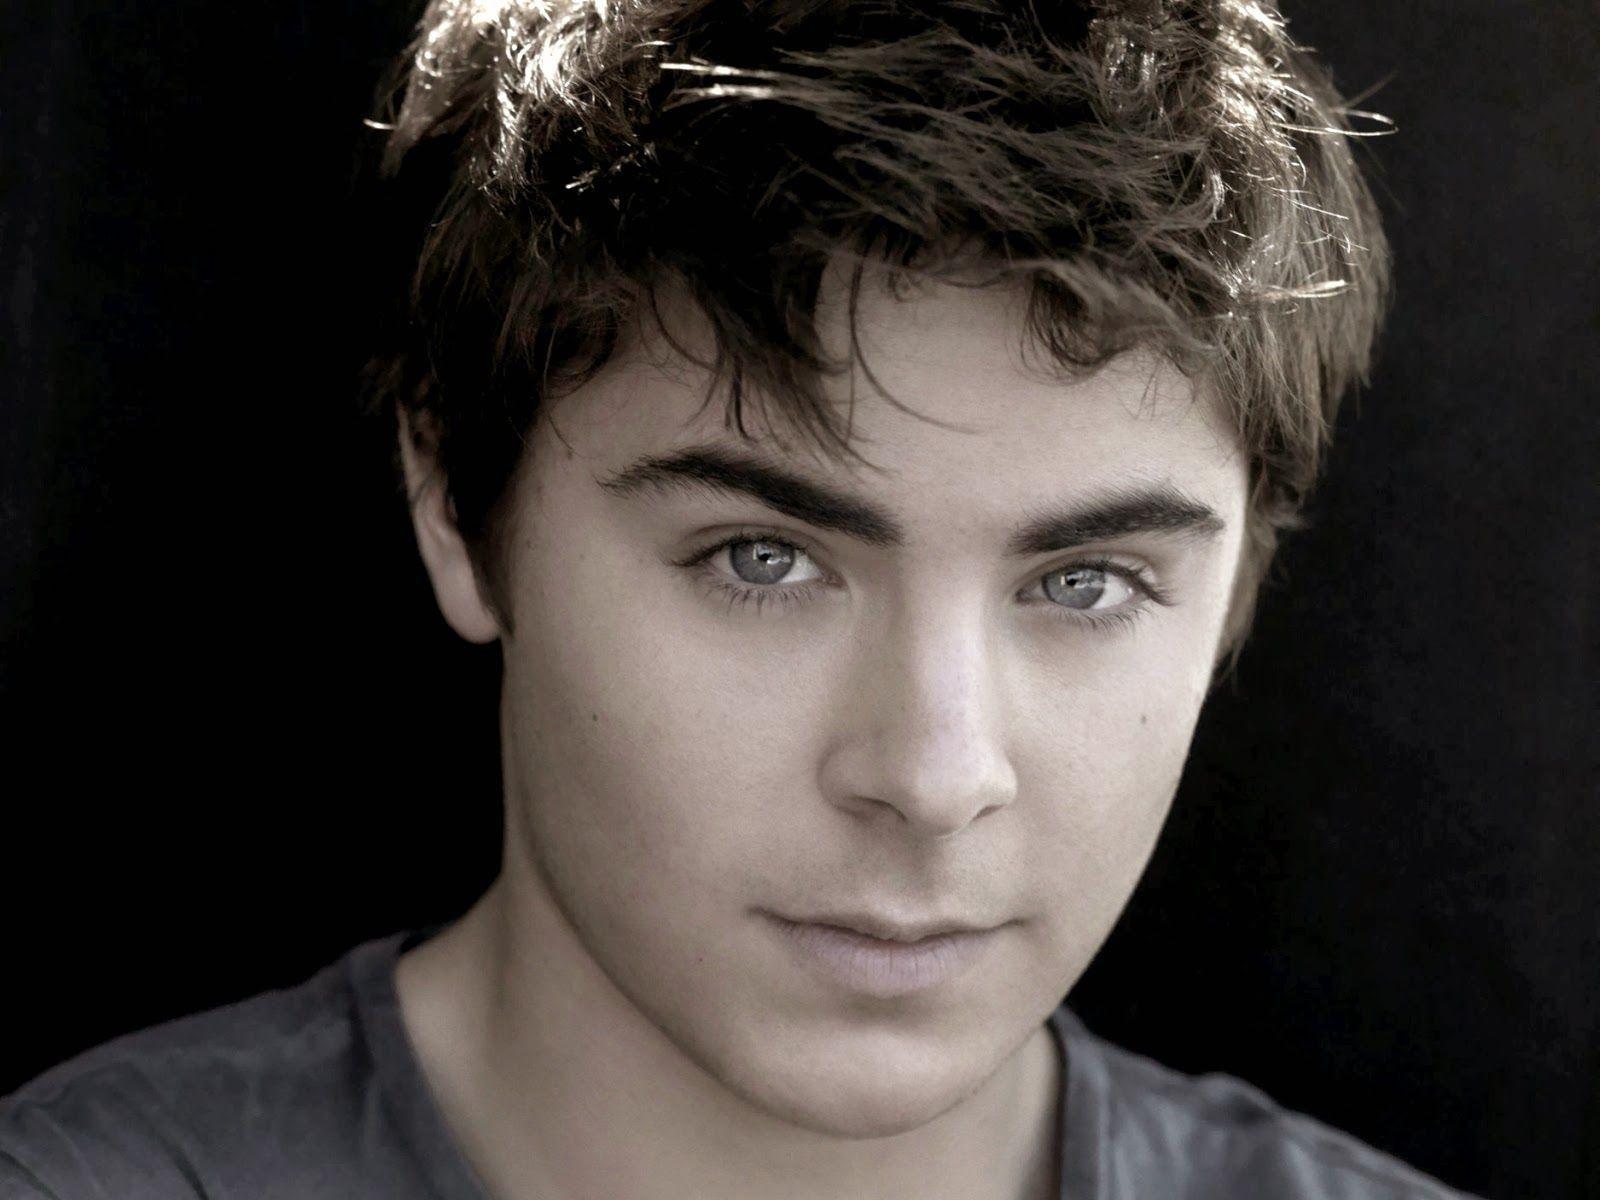 Male Celeb Wallpaper: American actor and singer Zac Efron